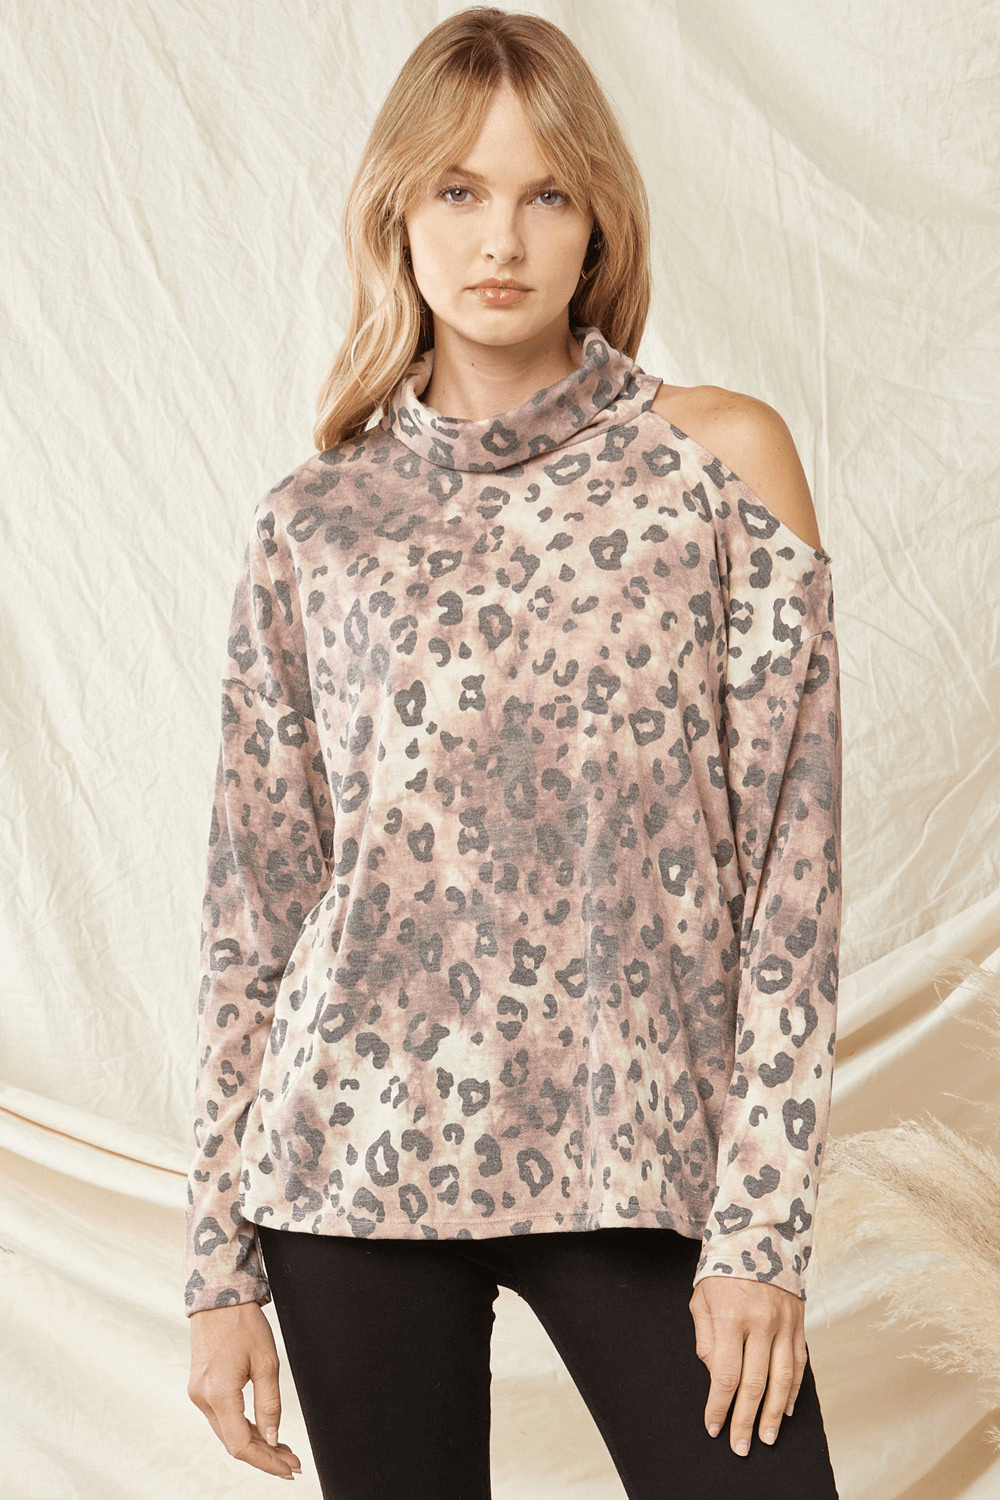 Fireside Leopard Top - Lady Dorothy Boutique